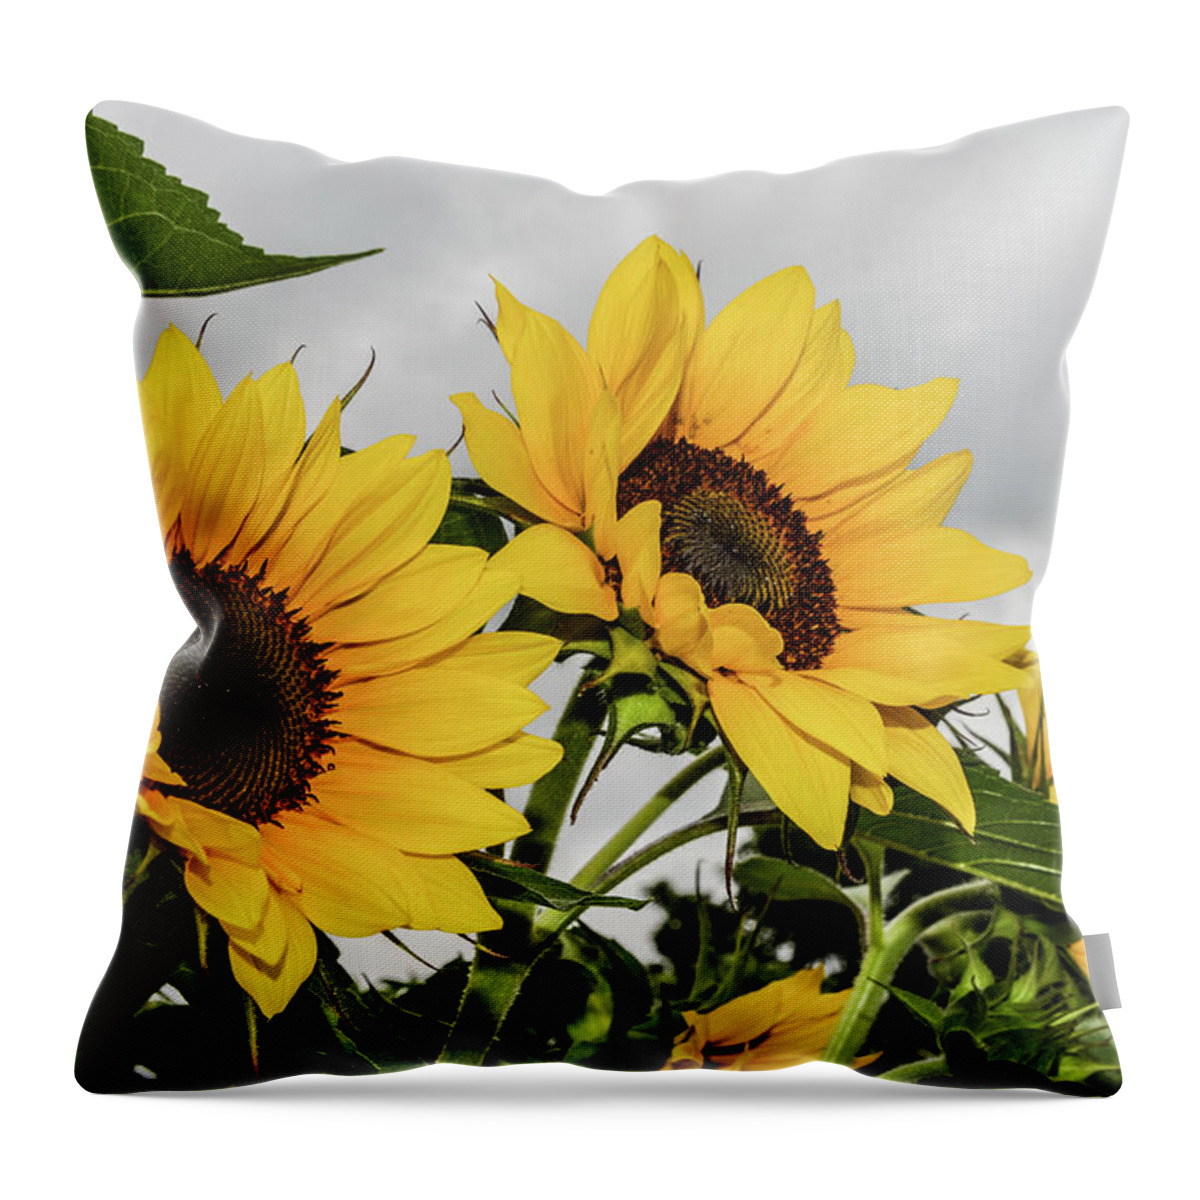 Sunflower Throw Pillow featuring the photograph Sunflowers Brighten a Cloudy Day by Tana Reiff